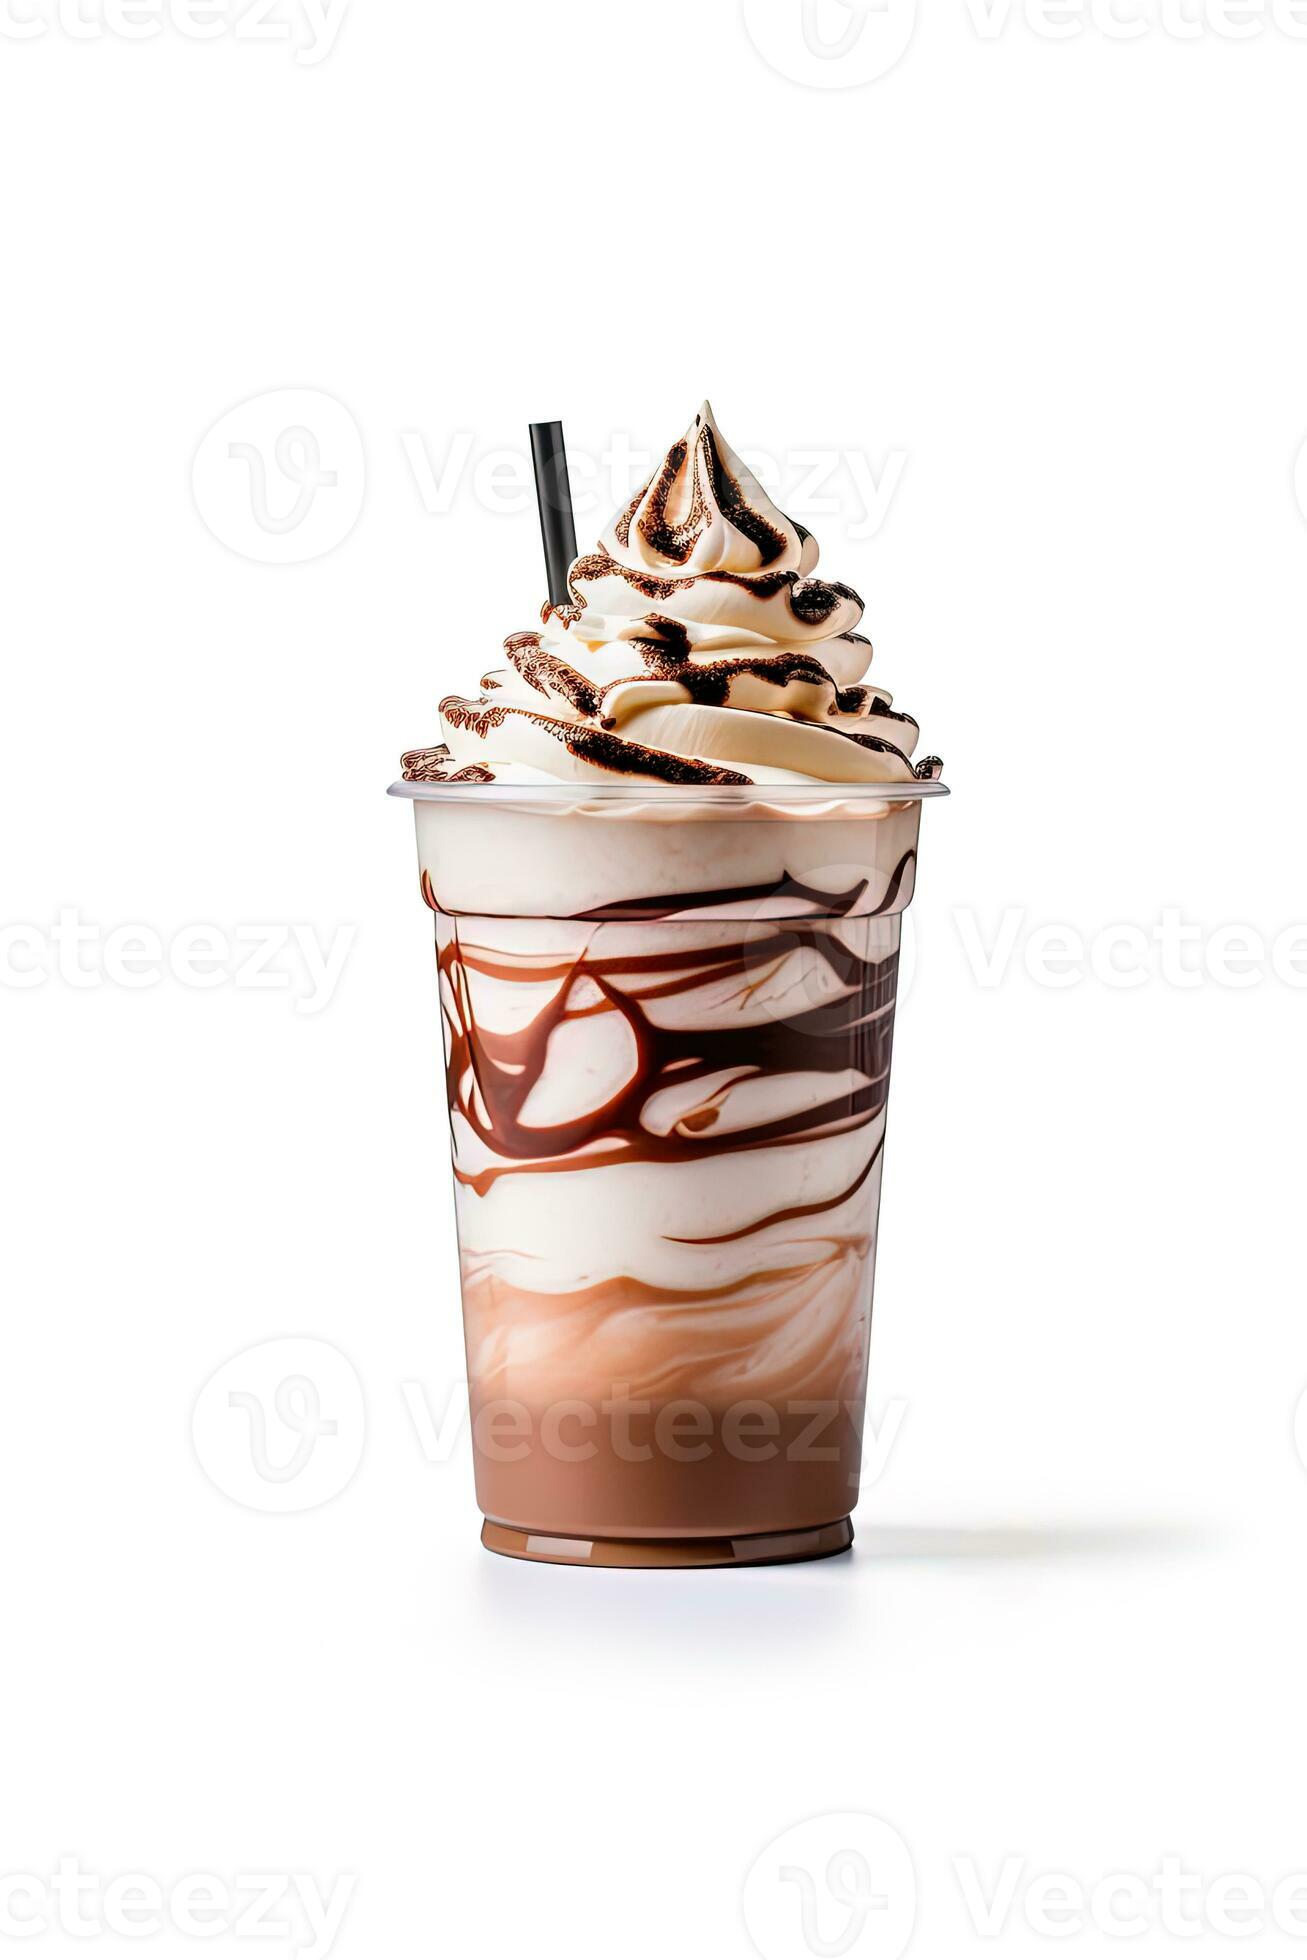 https://static.vecteezy.com/system/resources/previews/026/282/354/large_2x/chocolate-milkshake-in-plastic-takeaway-cup-isolated-on-white-background-ai-generated-photo.jpg